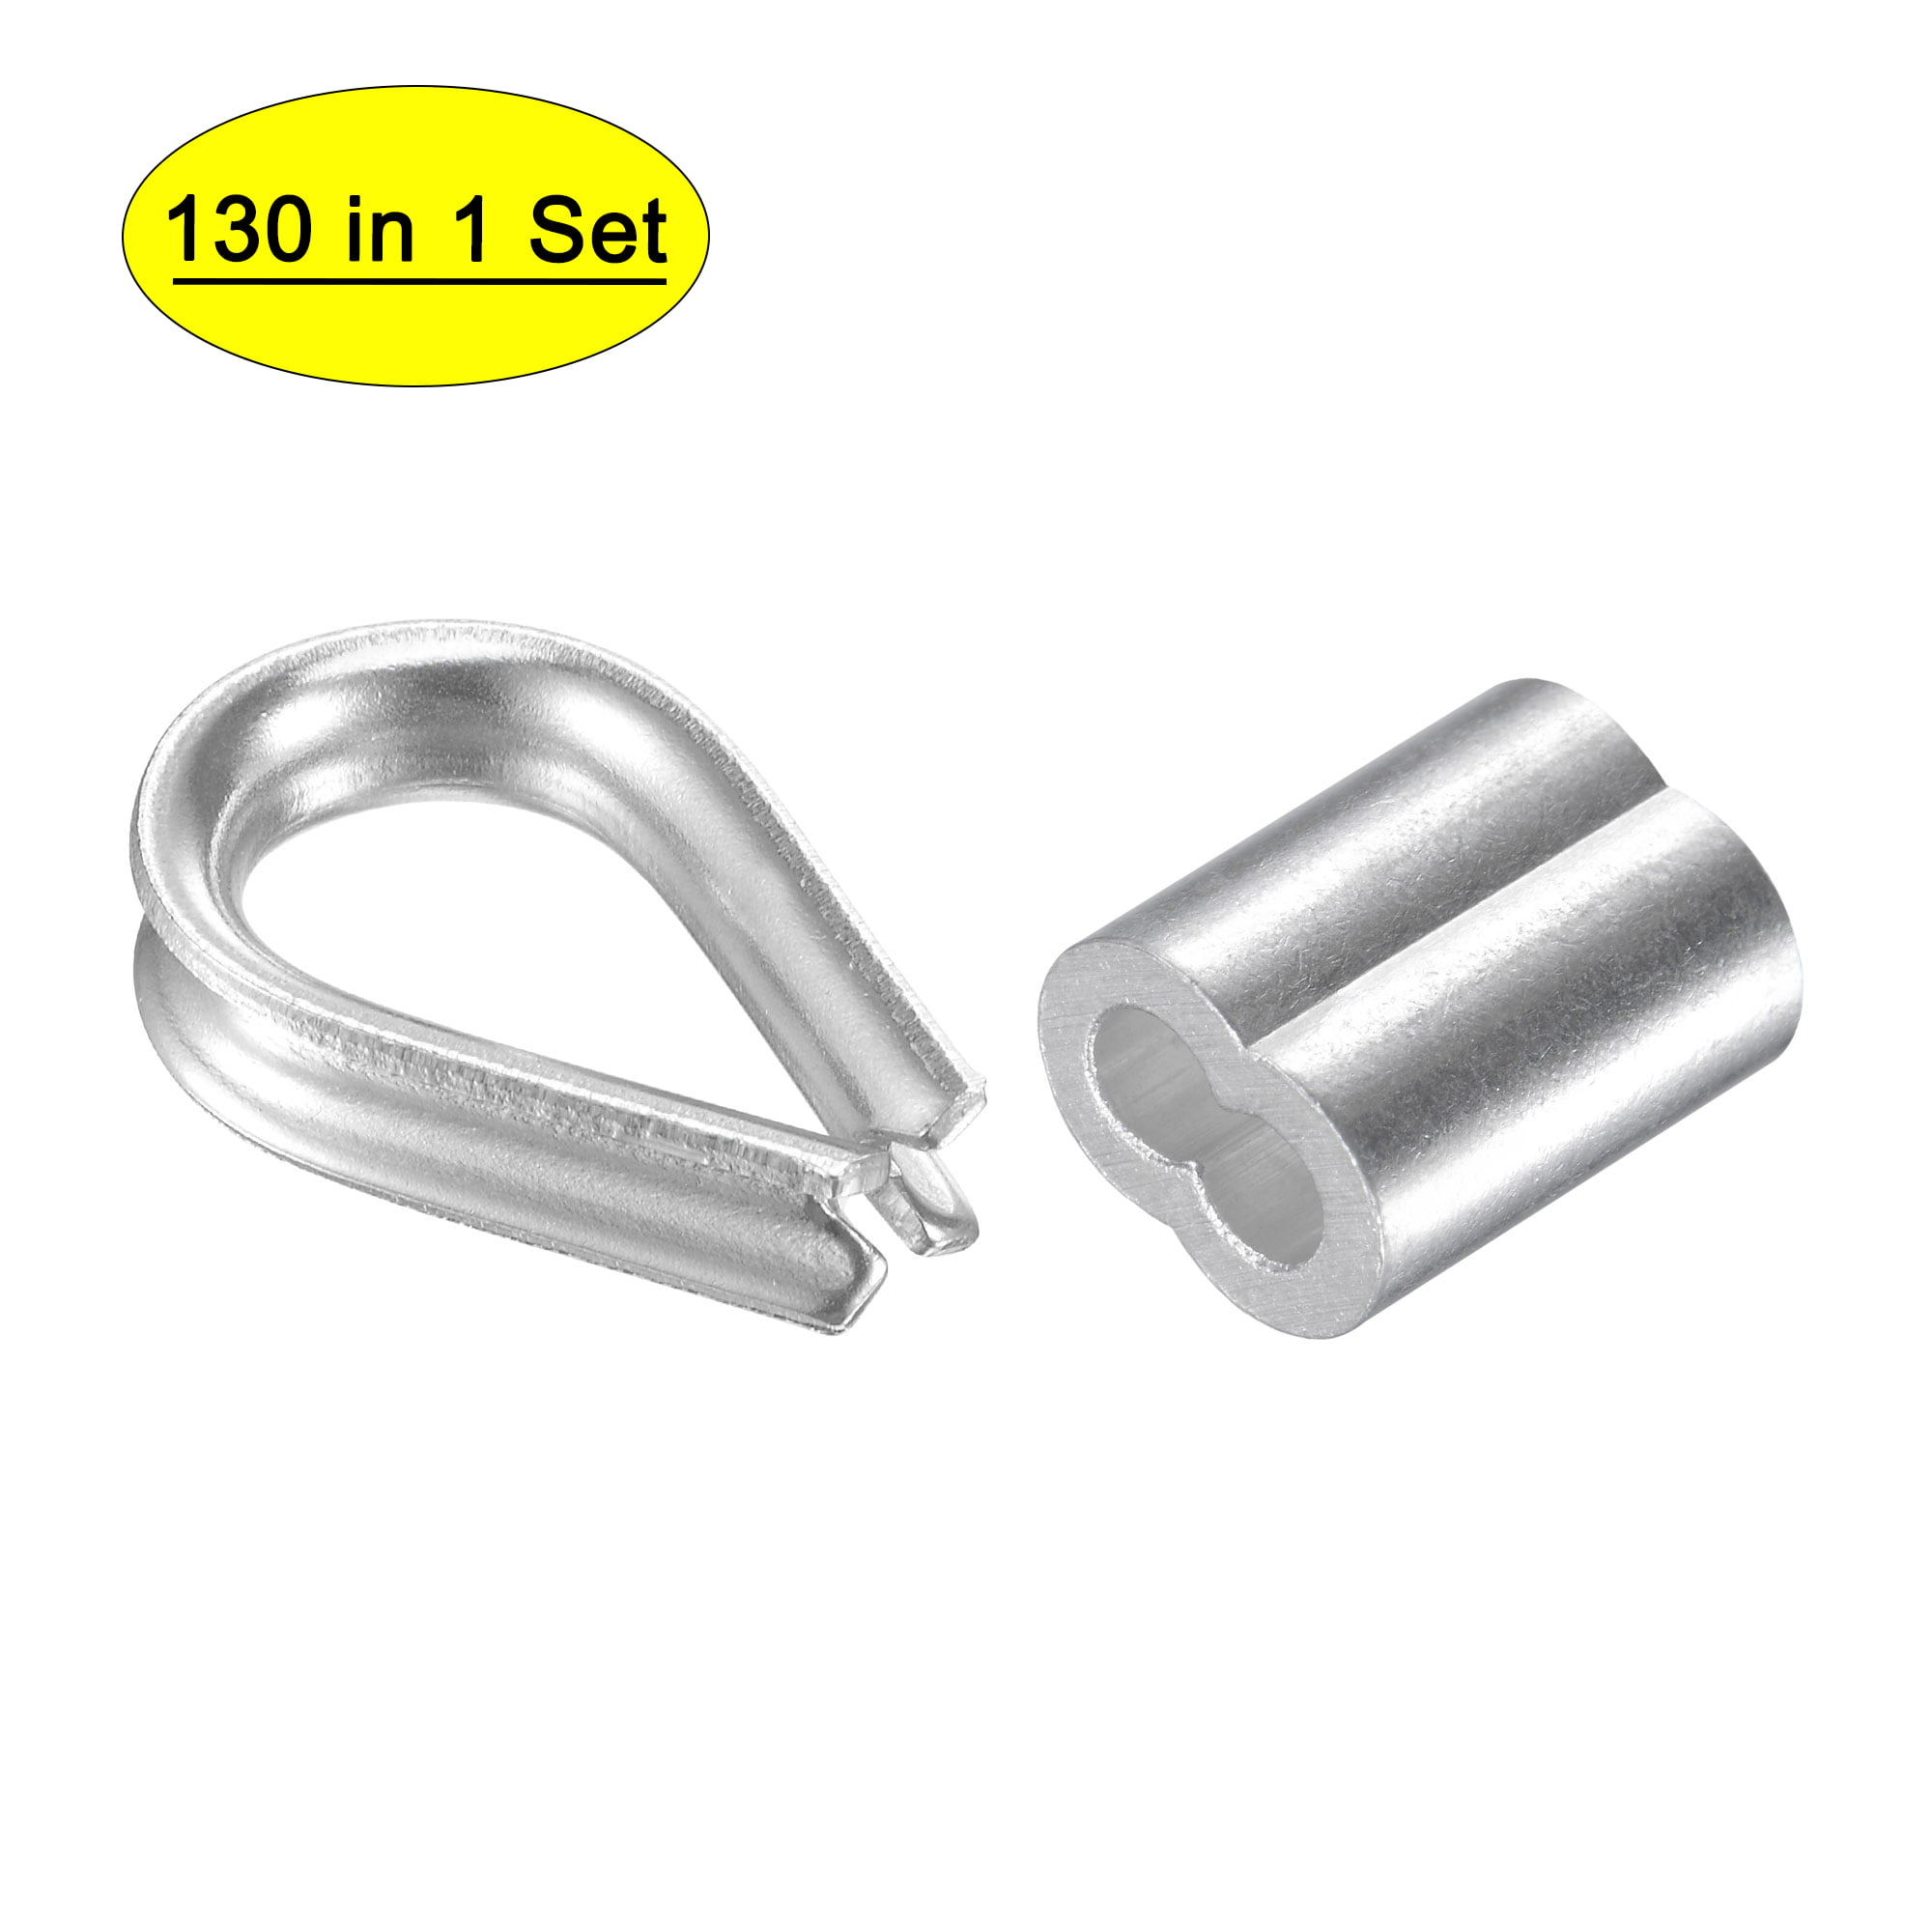 Uxcell M2 Stainless Steel Wire Rope Thimble Rigging Kit, 2.5mm Aluminum  Sleeve, 130in 1 Set 